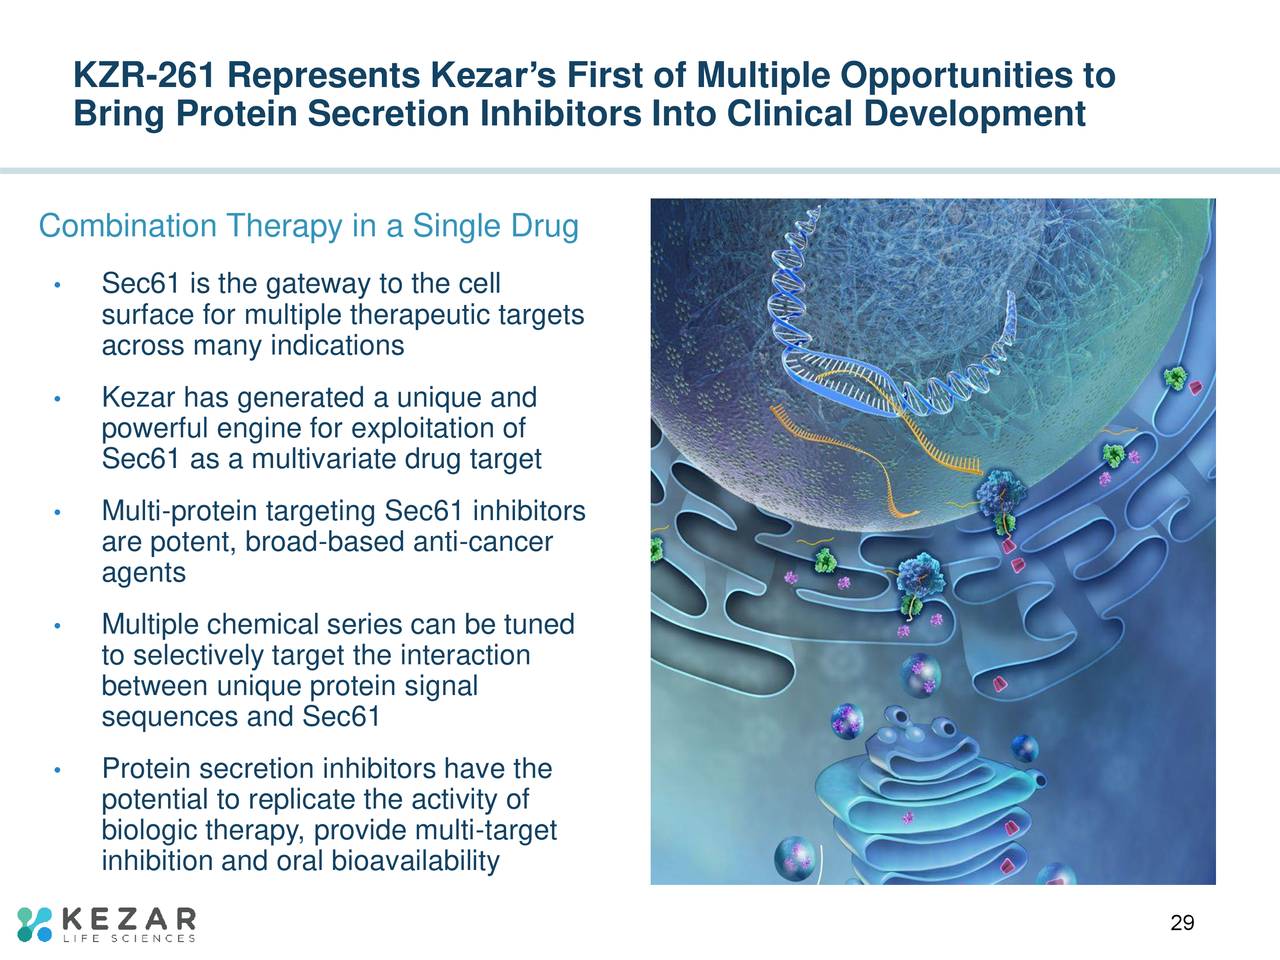 KZR-261 Represents Kezar’s First of Multiple Opportunities to